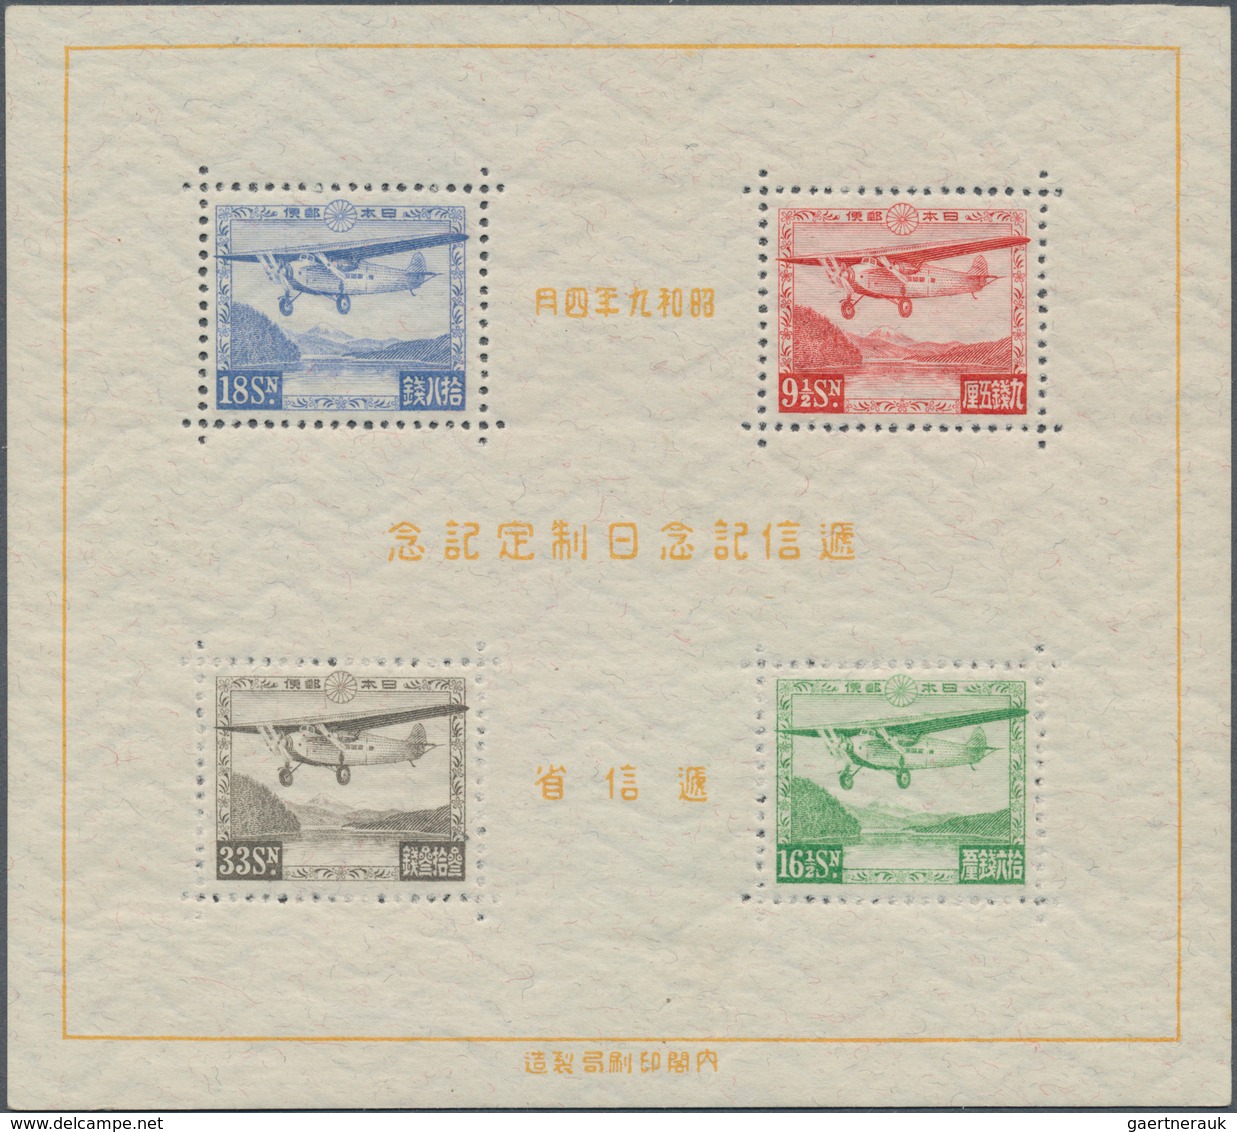 22887 Japan: 1871/1978, unused mounted mint (MNH from 1958) and used on Yvert preprinted pages in Yvert Al